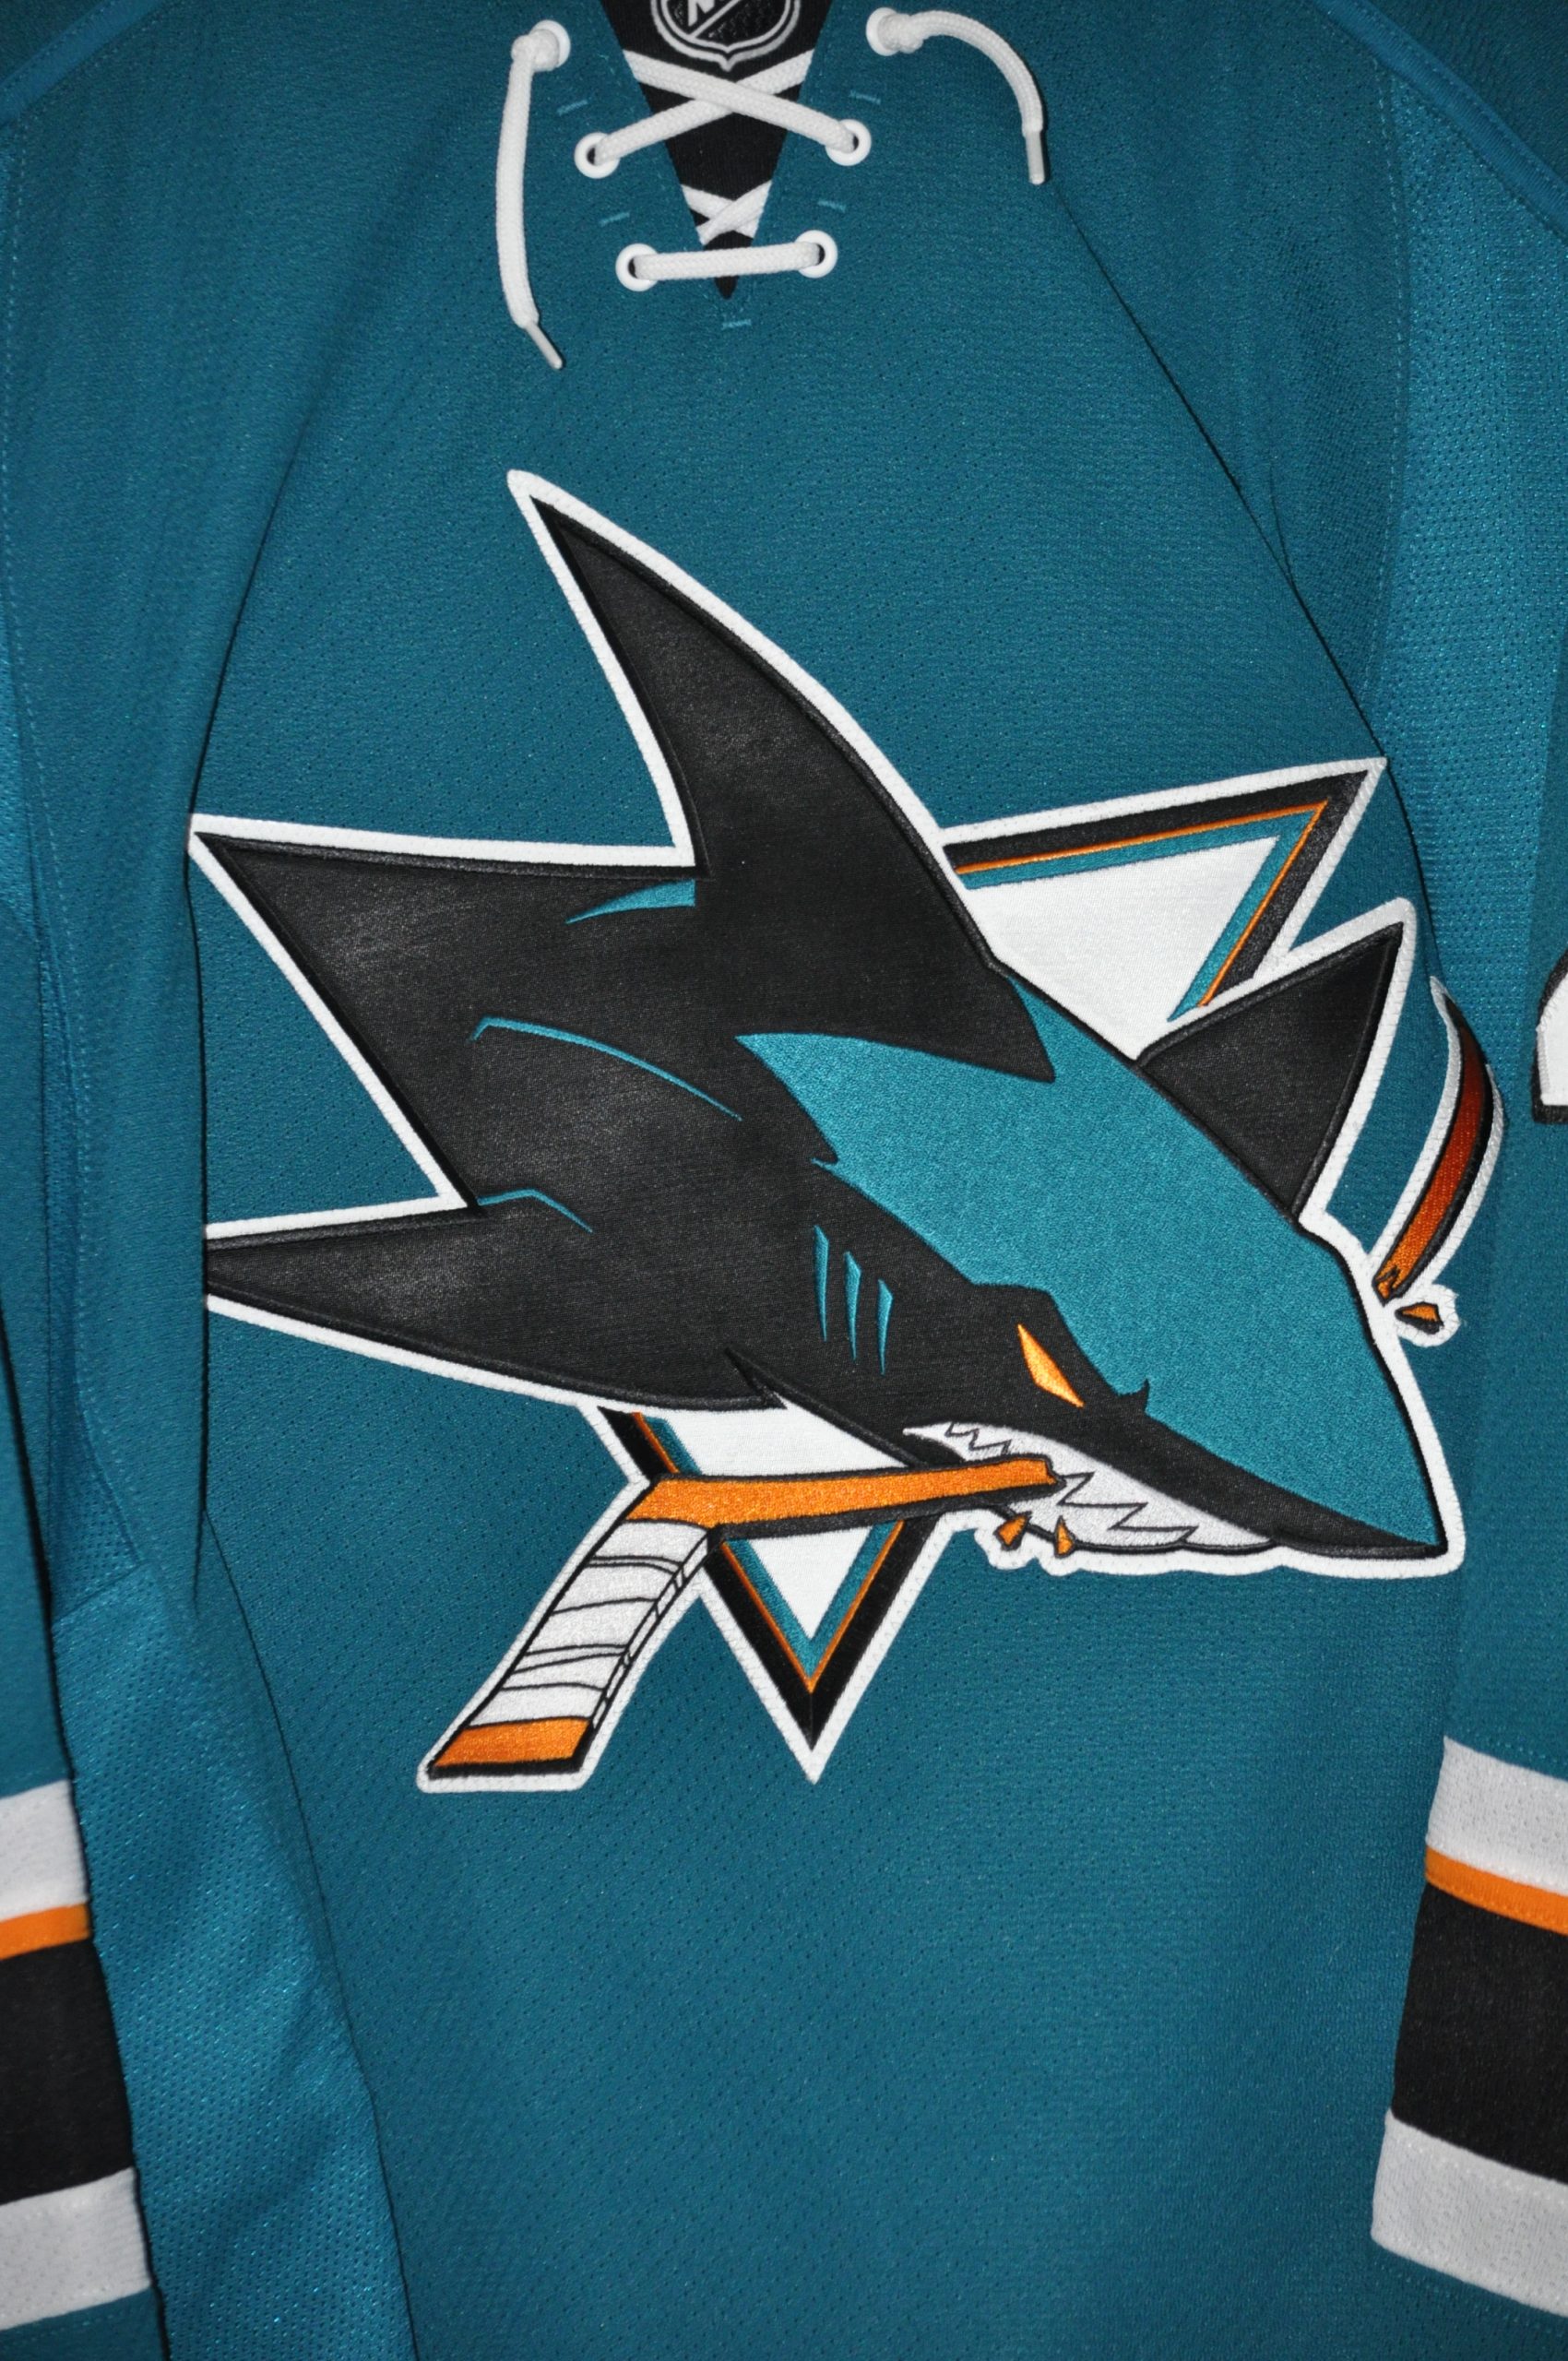 San Jose Sharks Joel Ward Teal Jersey with 100th Anniversary patch.